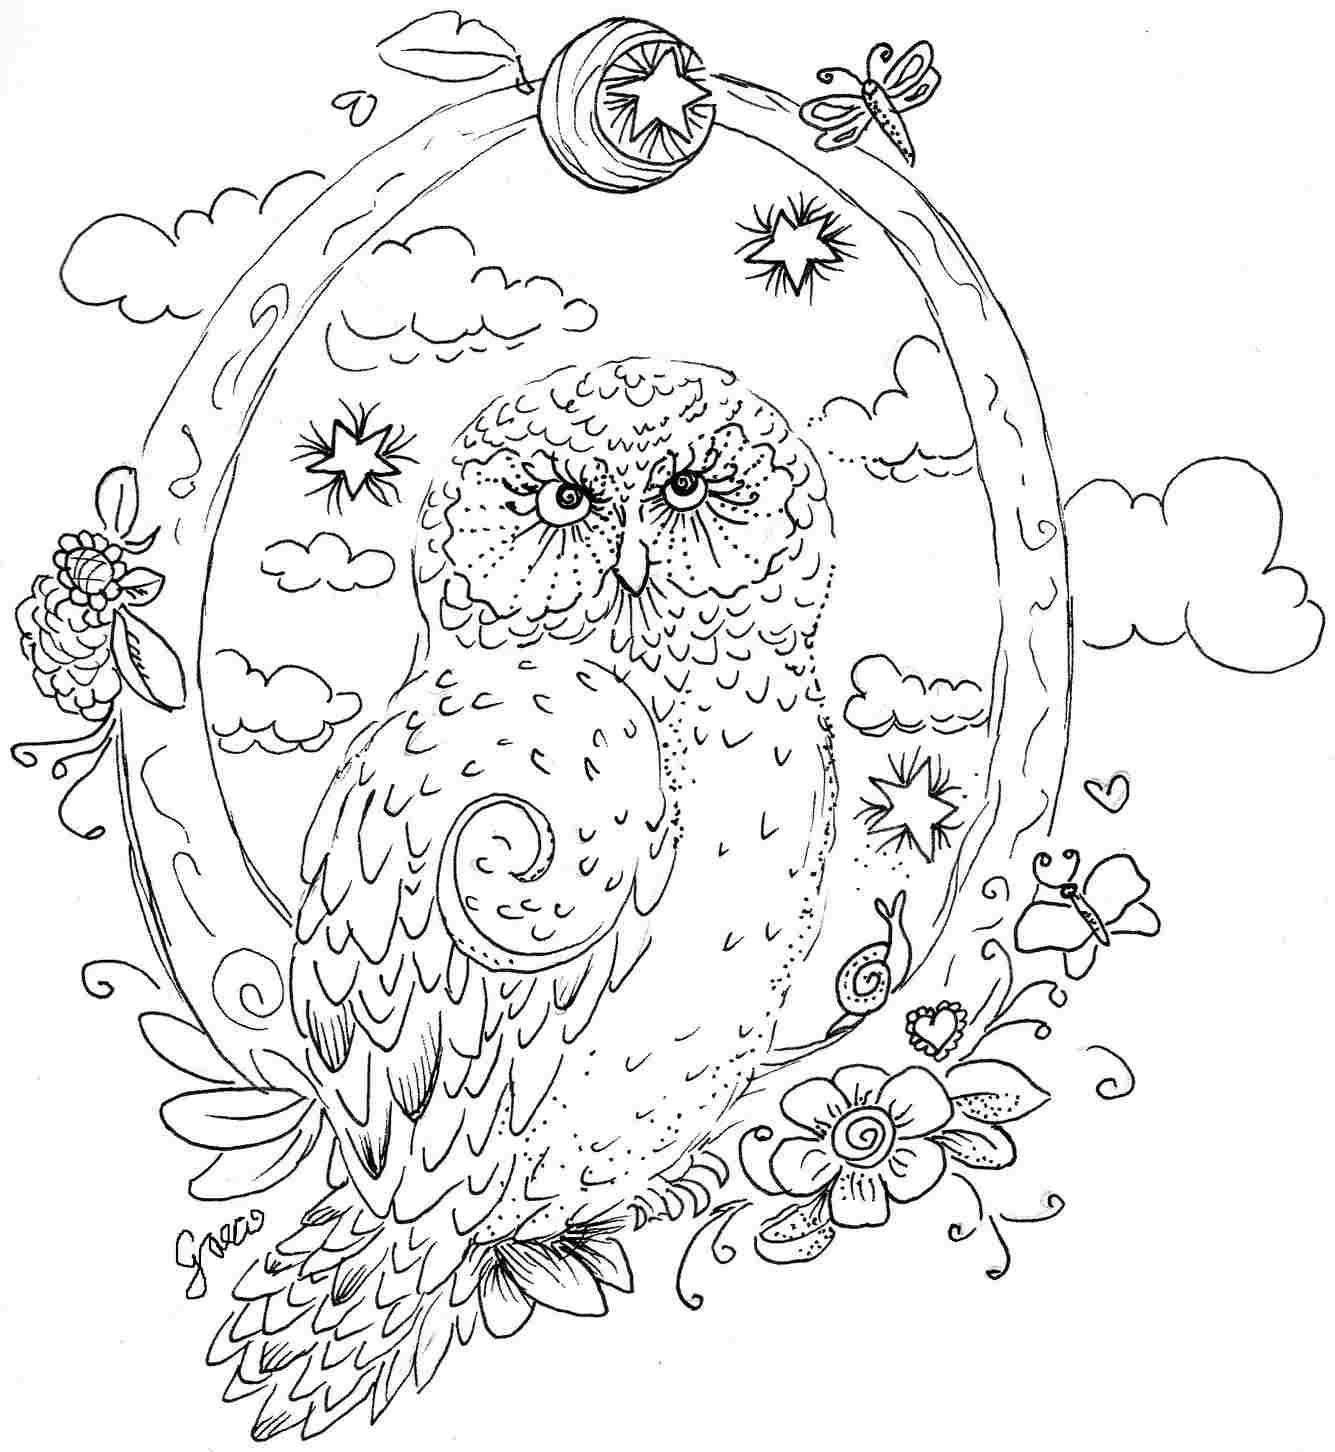 Marvelous Printable Coloring Pages Of Owls #7 - Free Printable ...